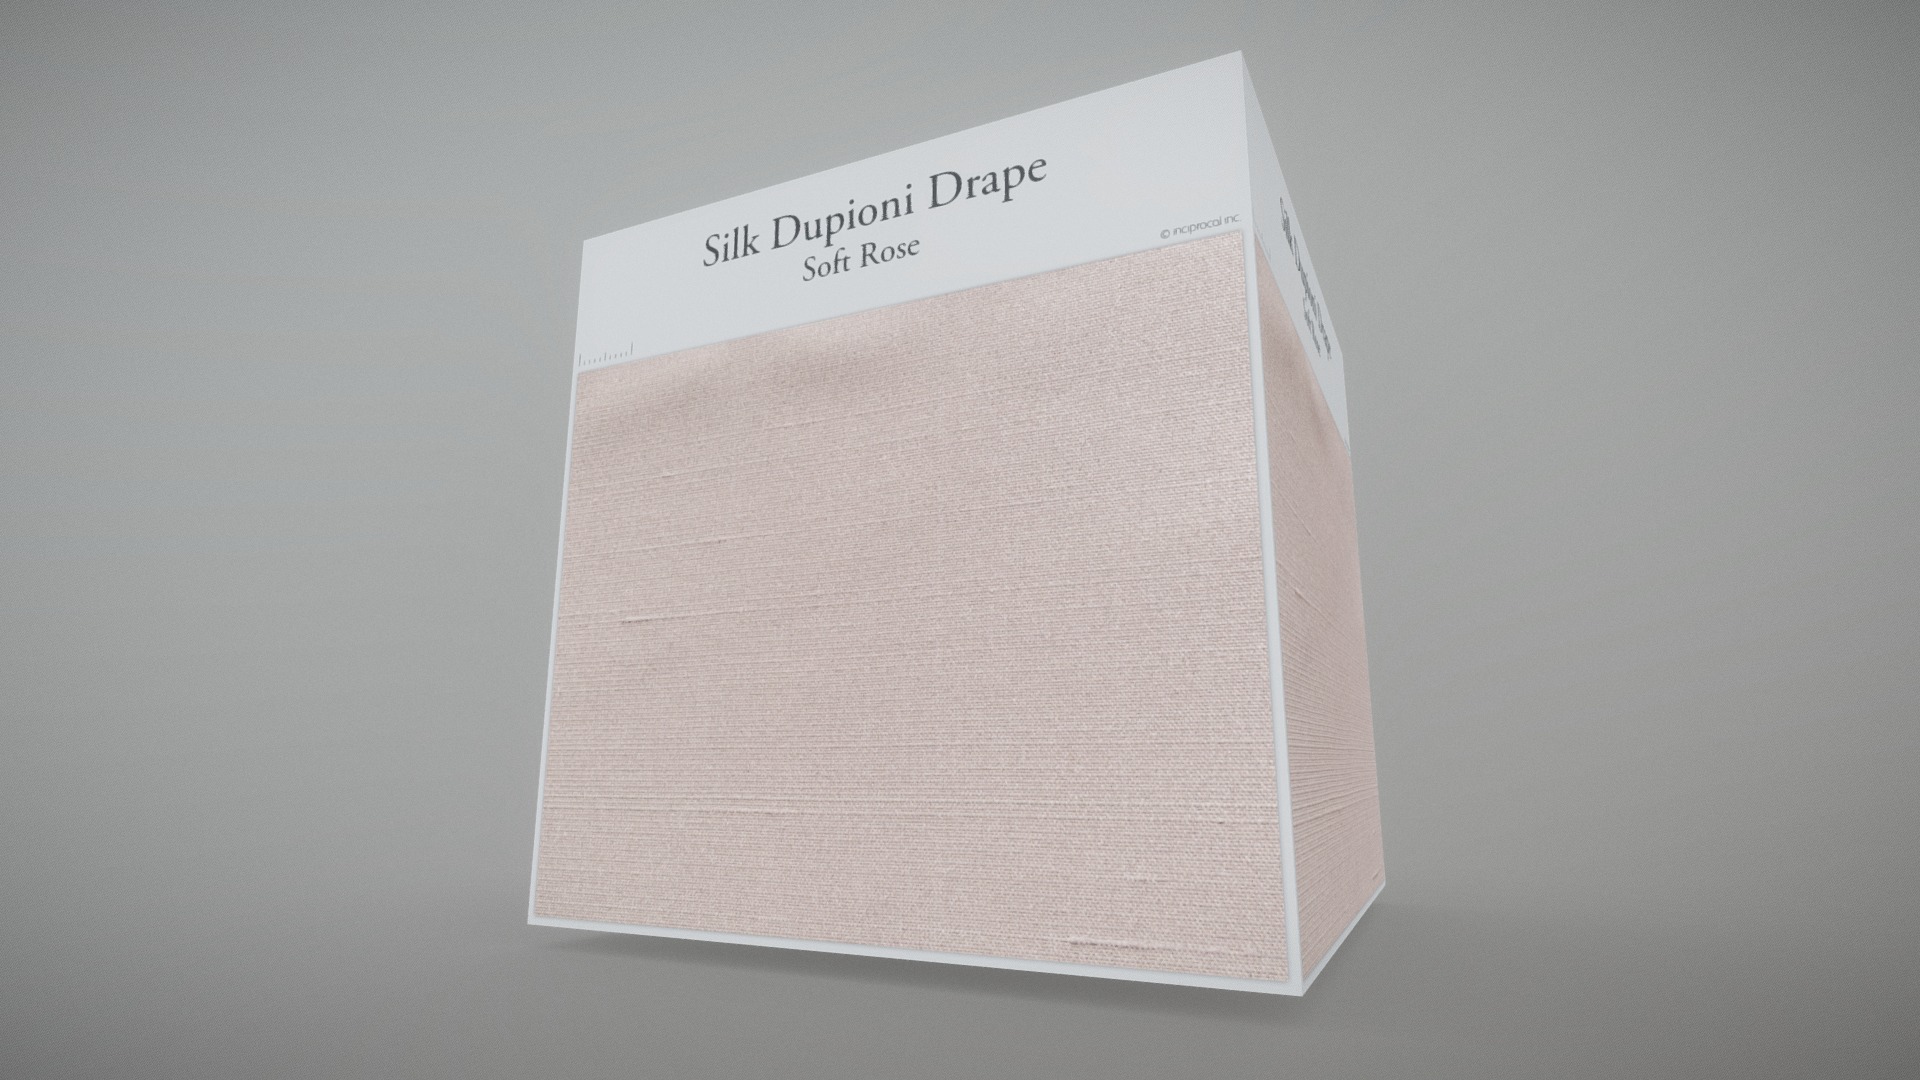 3D model Silk Dupioni Drape (Soft Rose) - This is a 3D model of the Silk Dupioni Drape (Soft Rose). The 3D model is about a book on a table.